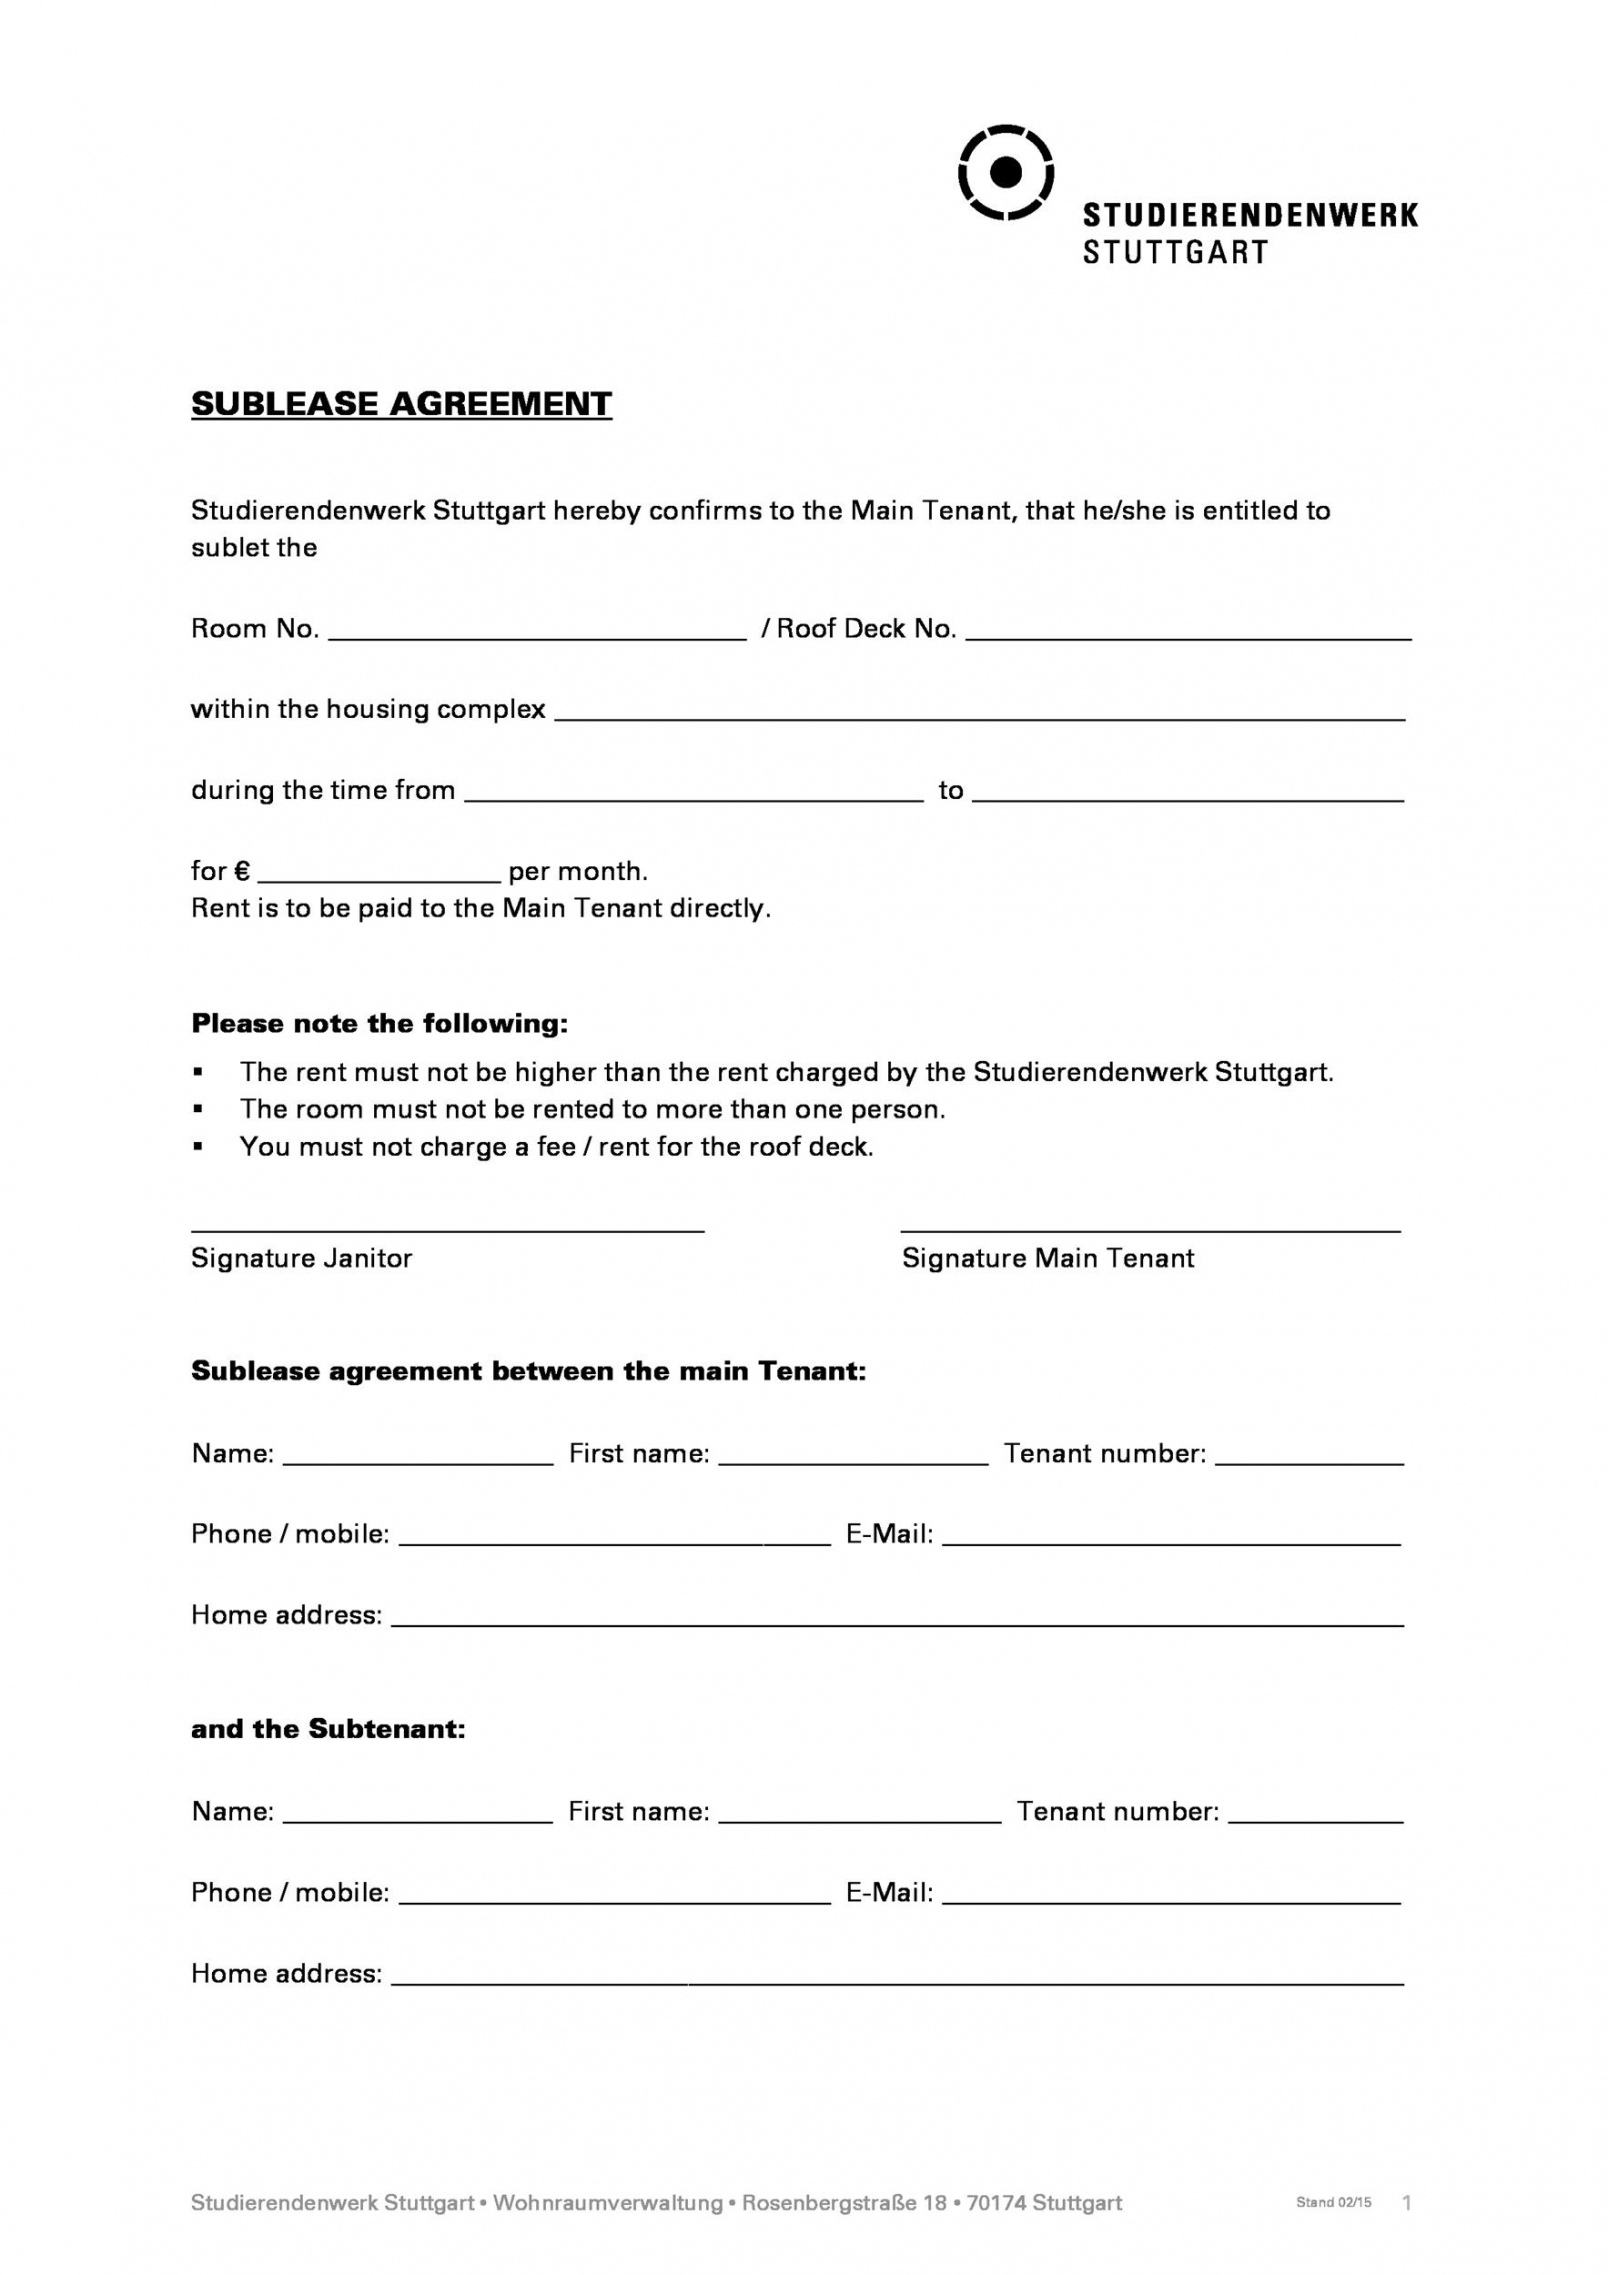 free 40 professional sublease agreement templates &amp; forms ᐅ commercial sublease agreement template example